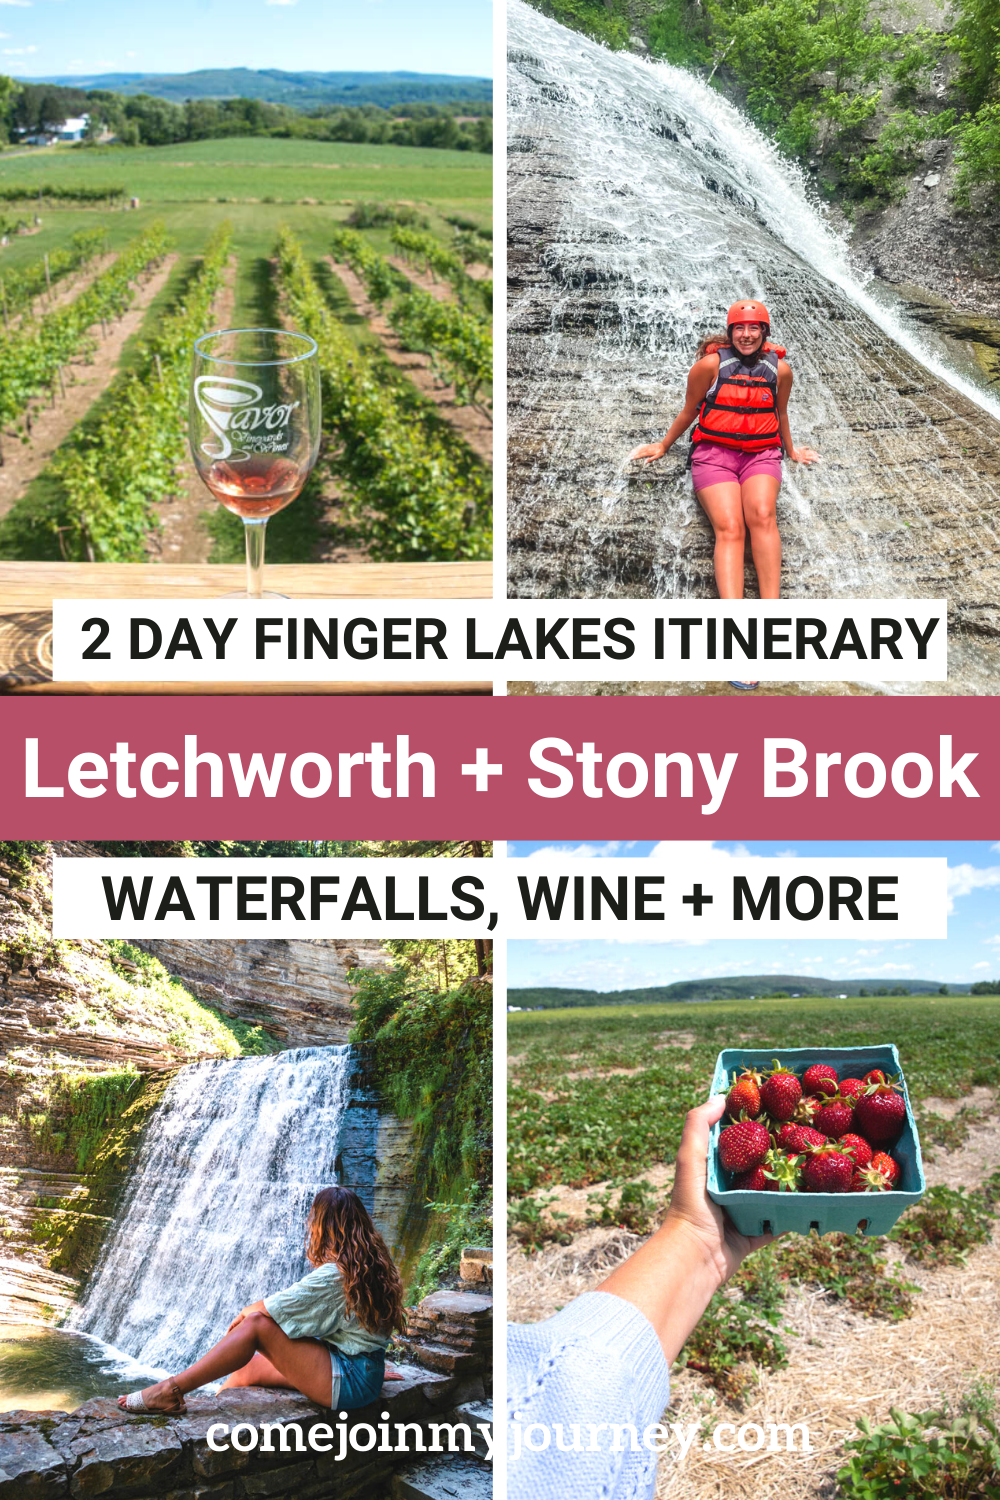 Letchworth & Stony Brook State Park: 2 Amazing Days of Waterfalls, Wine + Farm Country Experiences